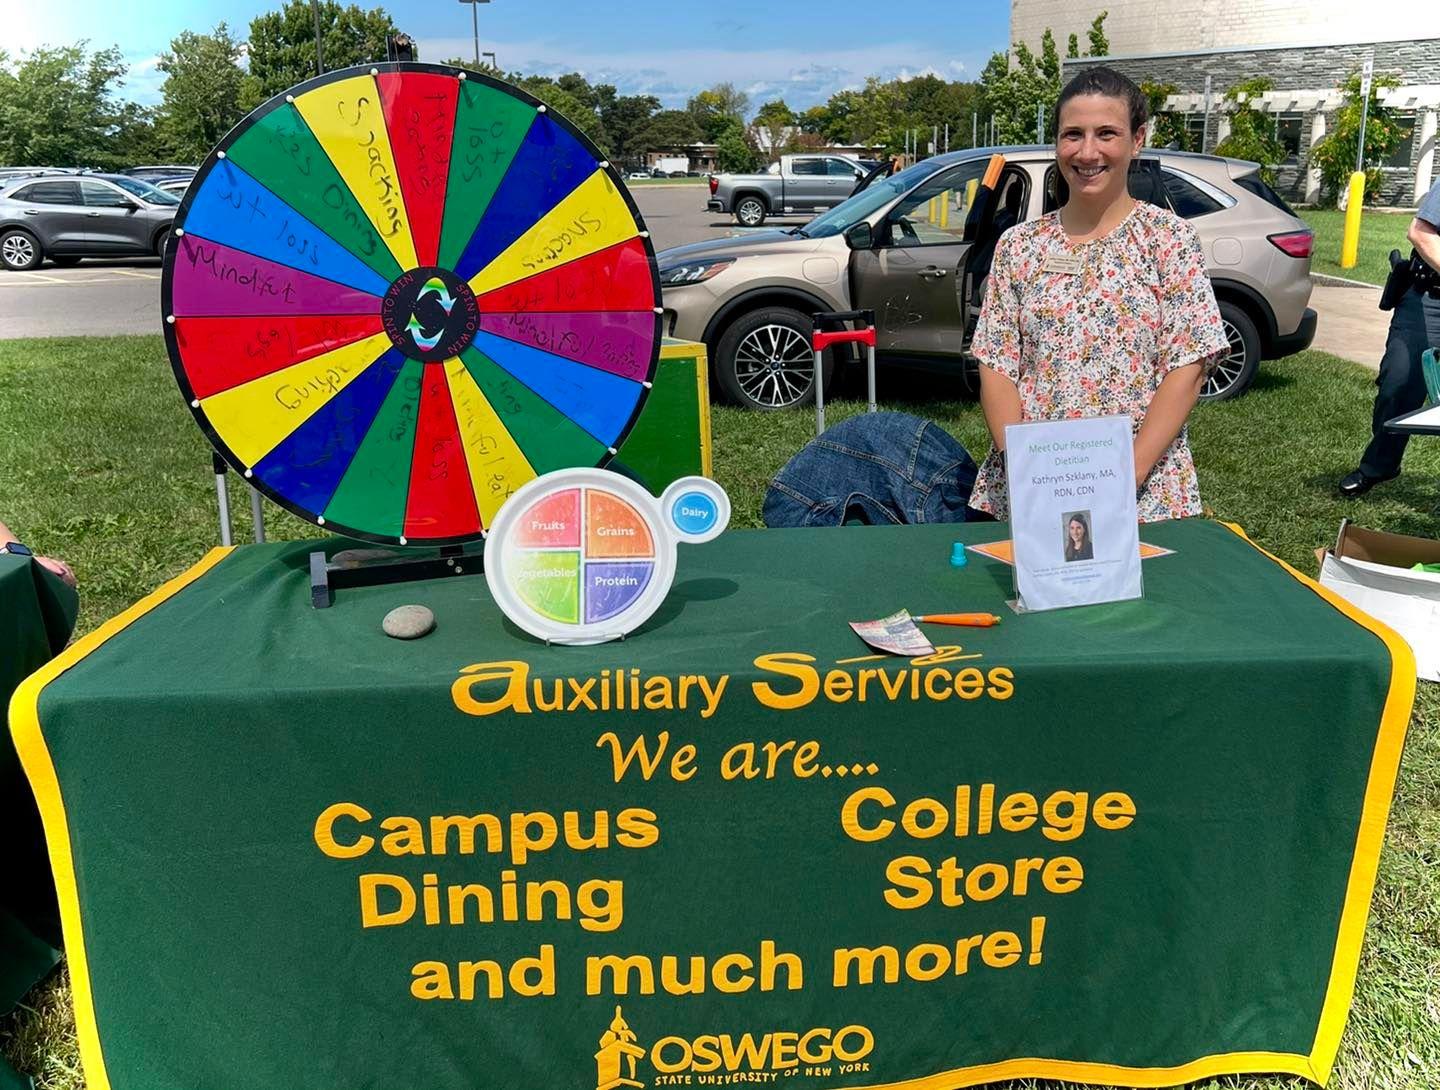 Kathryn Szklany, the registered dietitian for SUNY Oswego Dining Services, did brief nutritional quizzes for prizes during the Mental Health and Wellness Fair